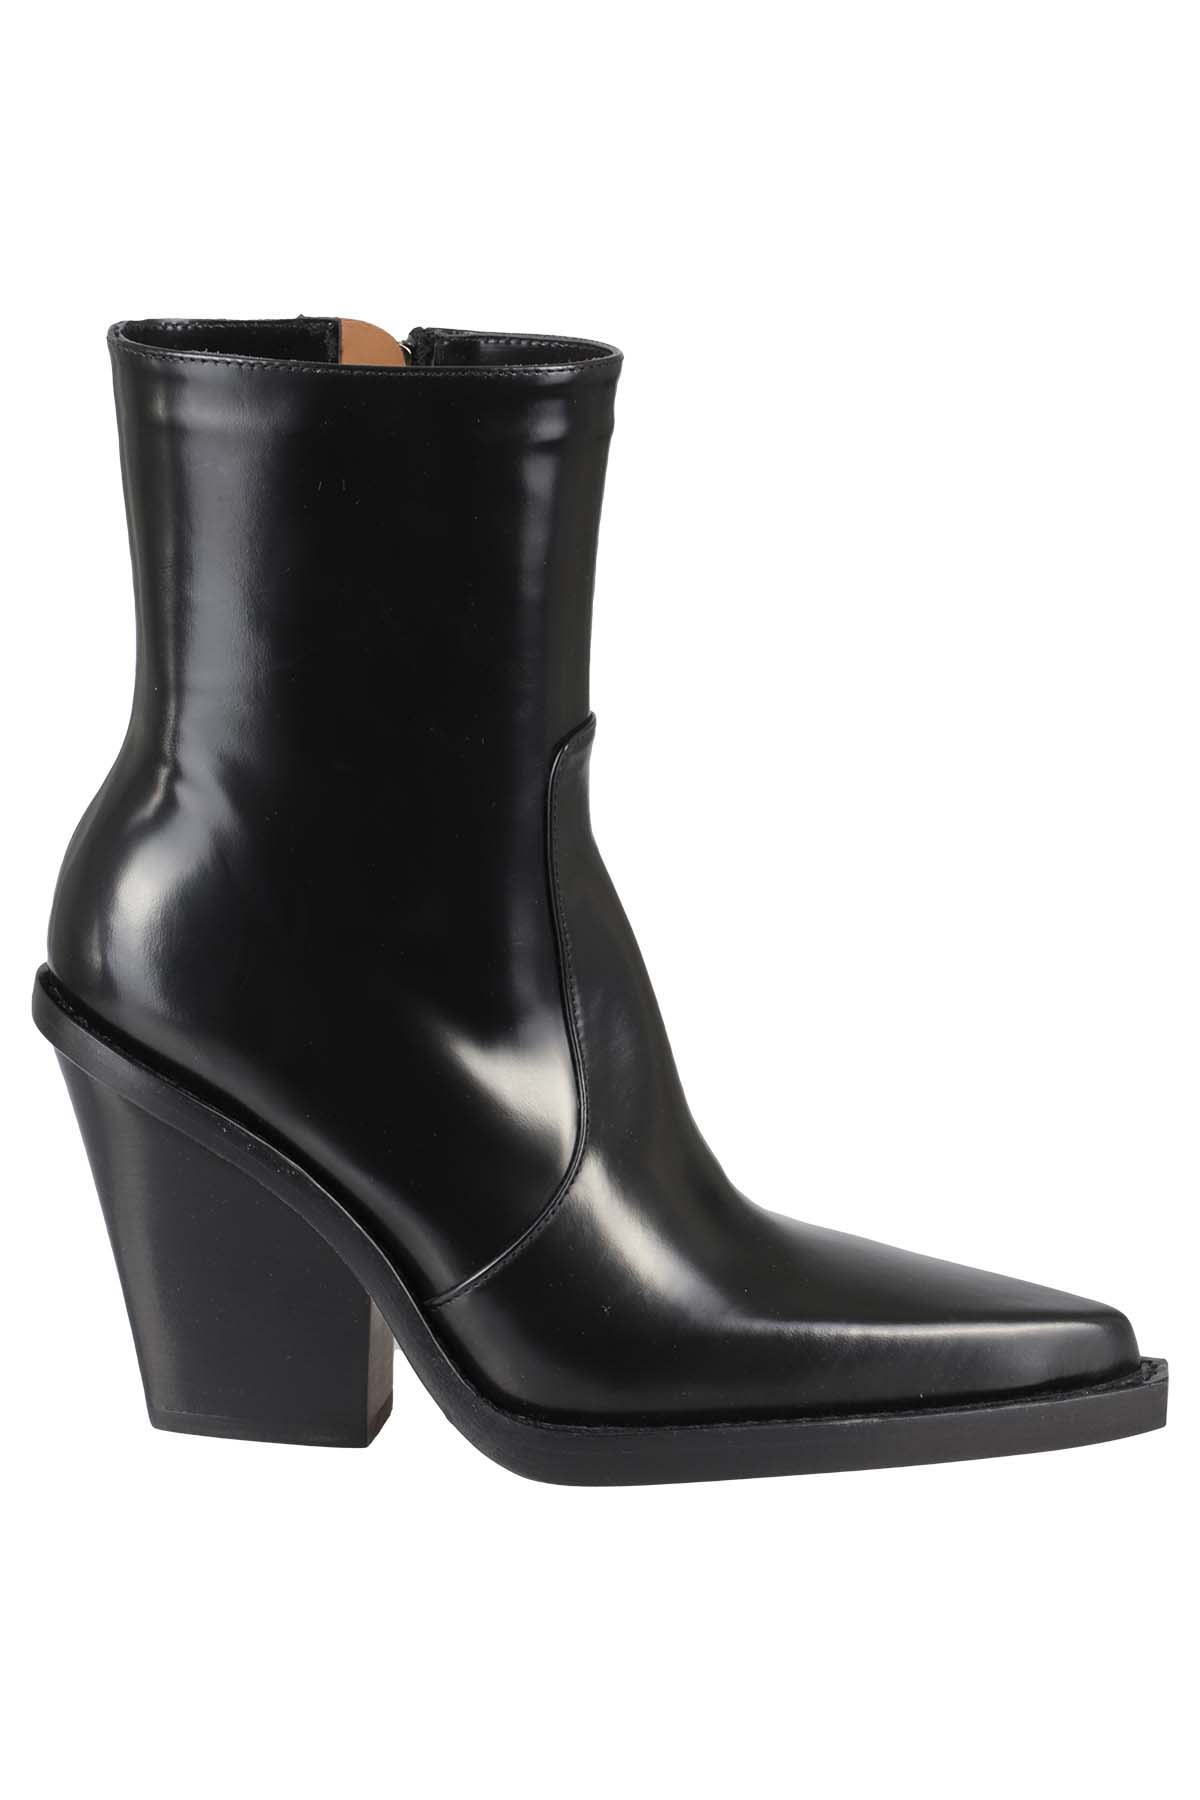 Paris Texas Rodeo Ankle Boot